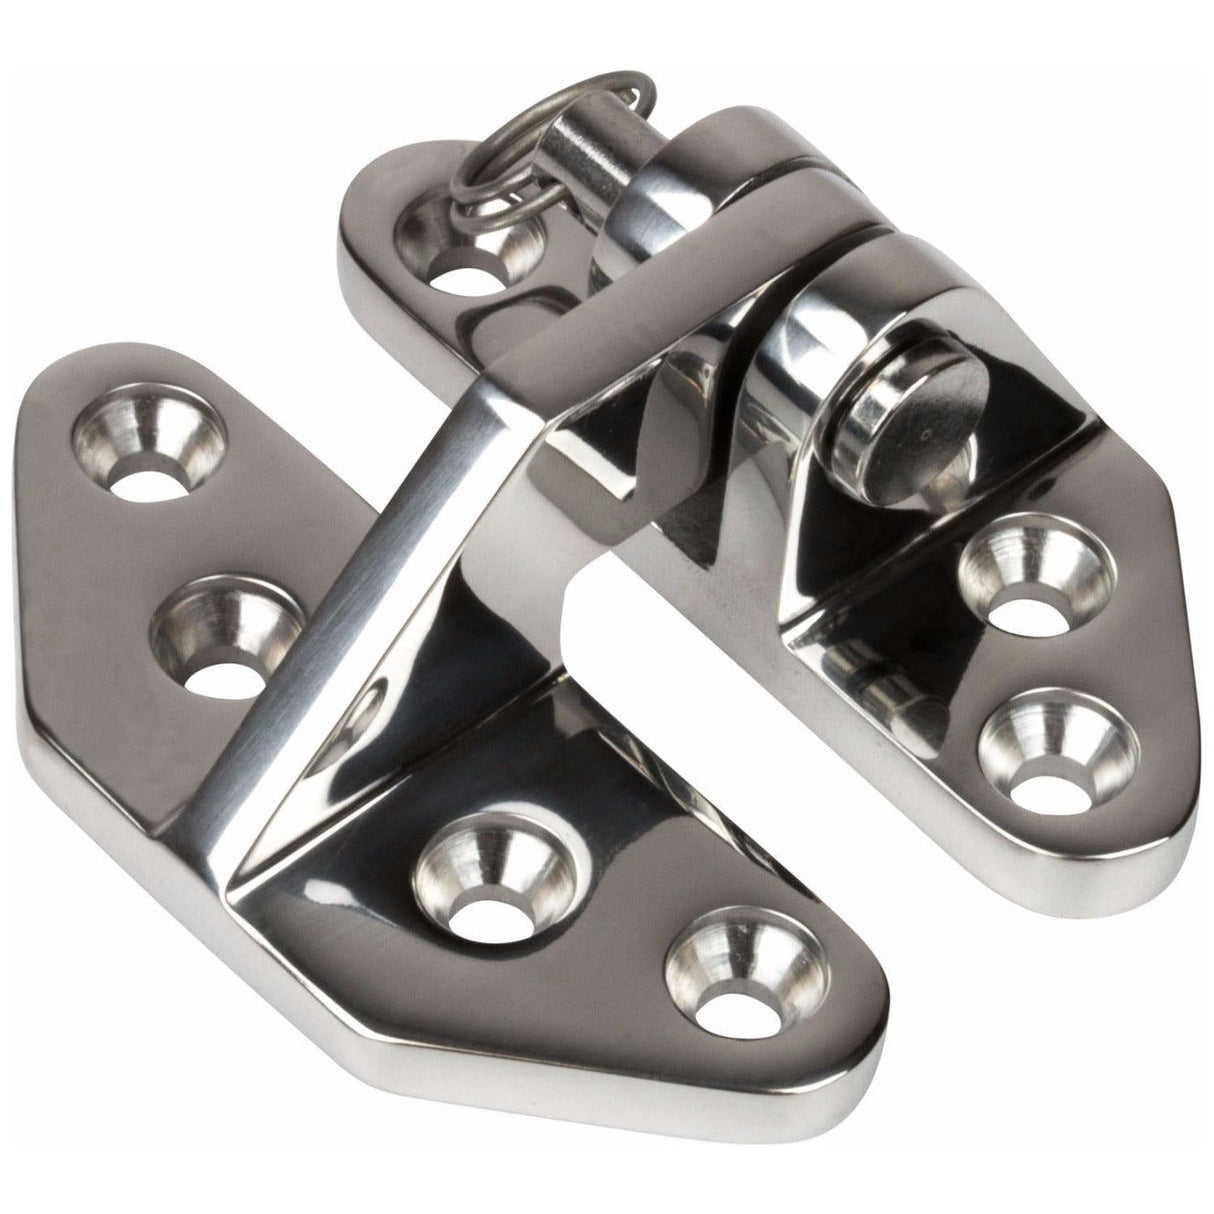 Hatch Hinge, Lift Off, 316 Stainless Steel